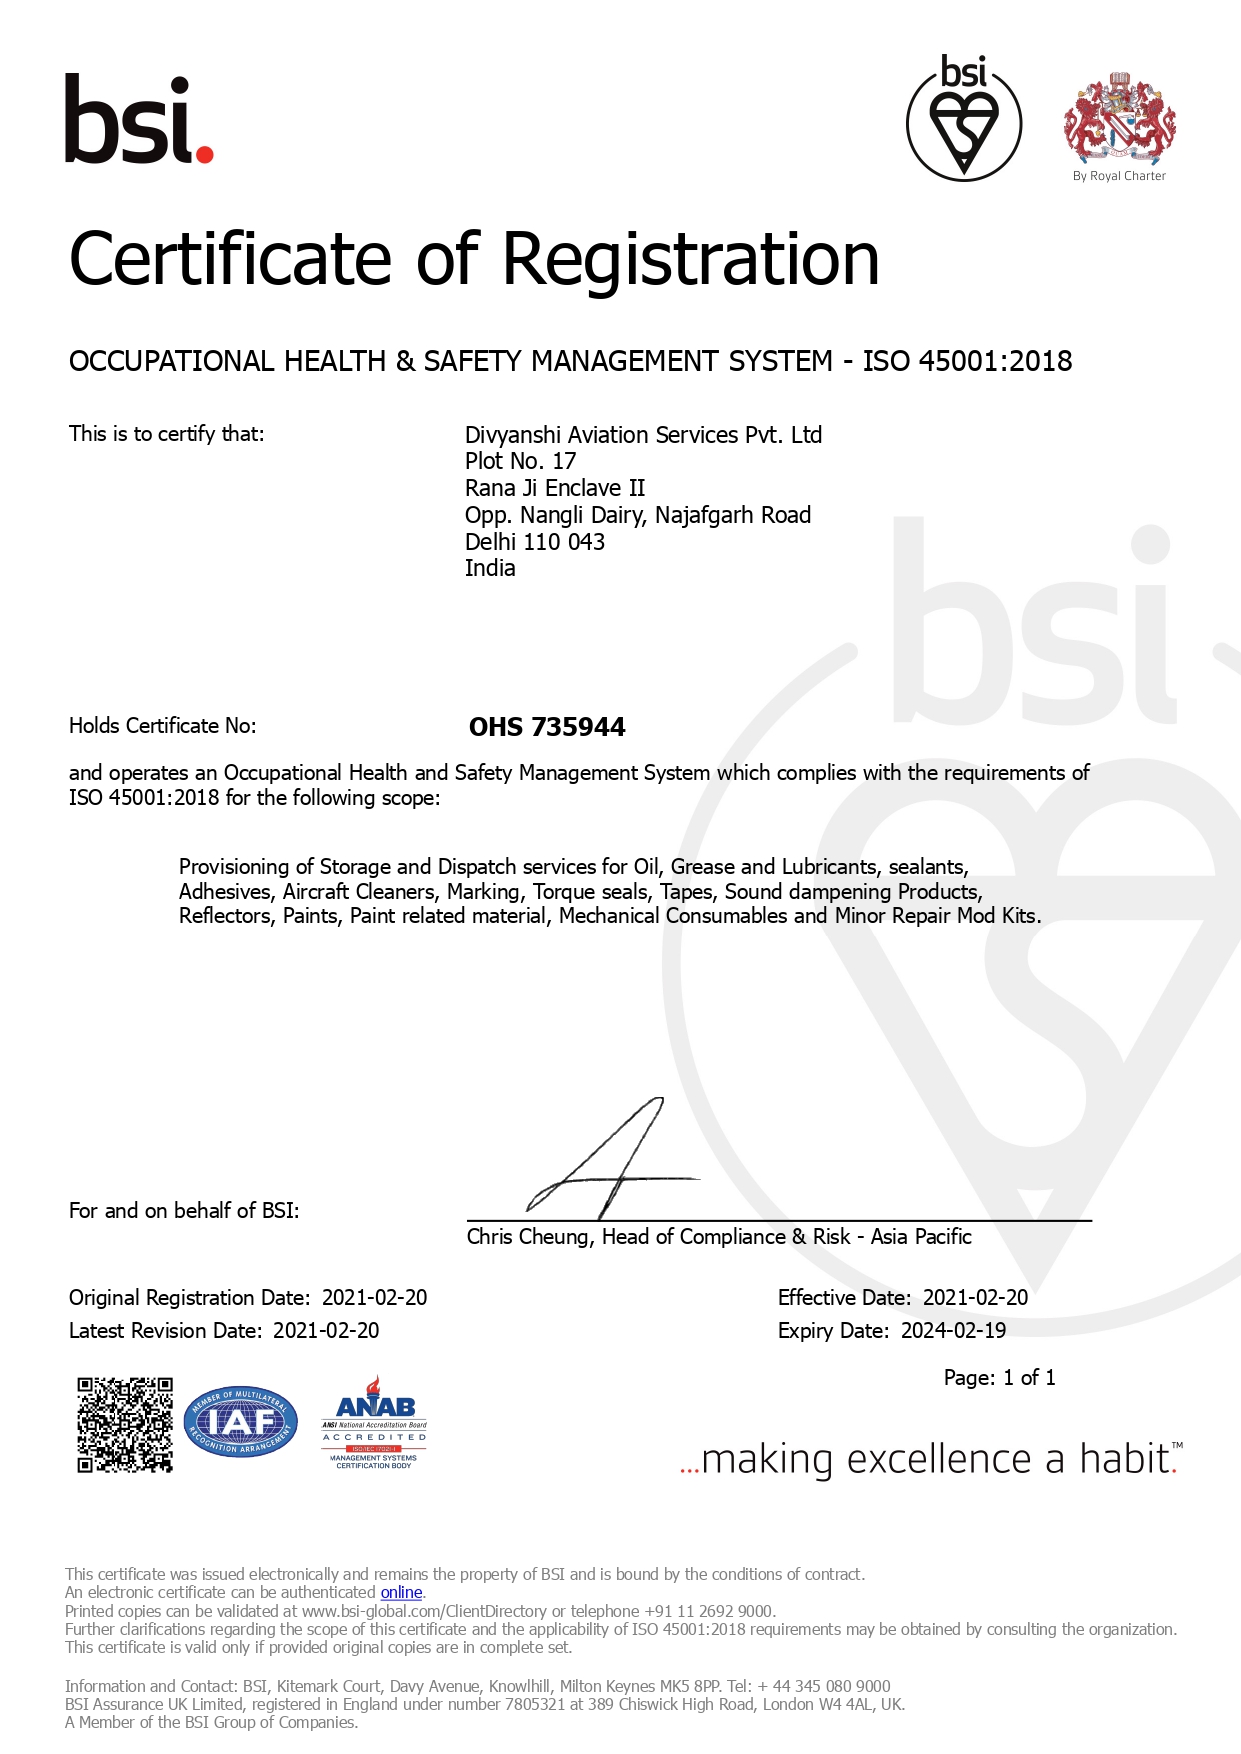 ISO 4500:2018 OHS certificate